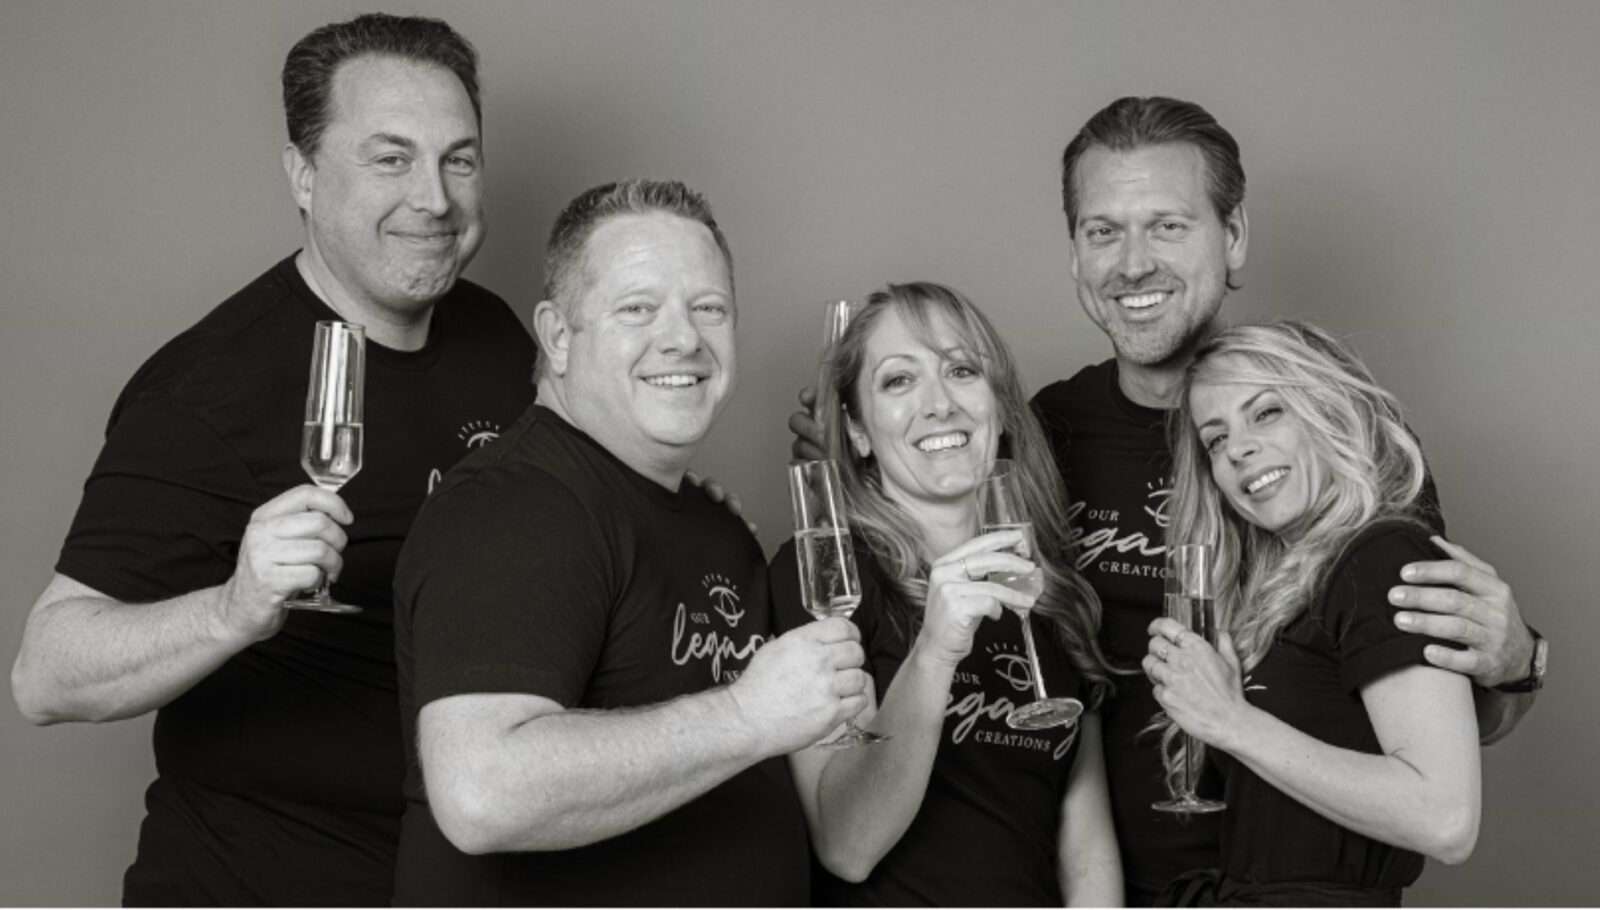 OLC founding members in black t-shirts smiling with champagne flutes.